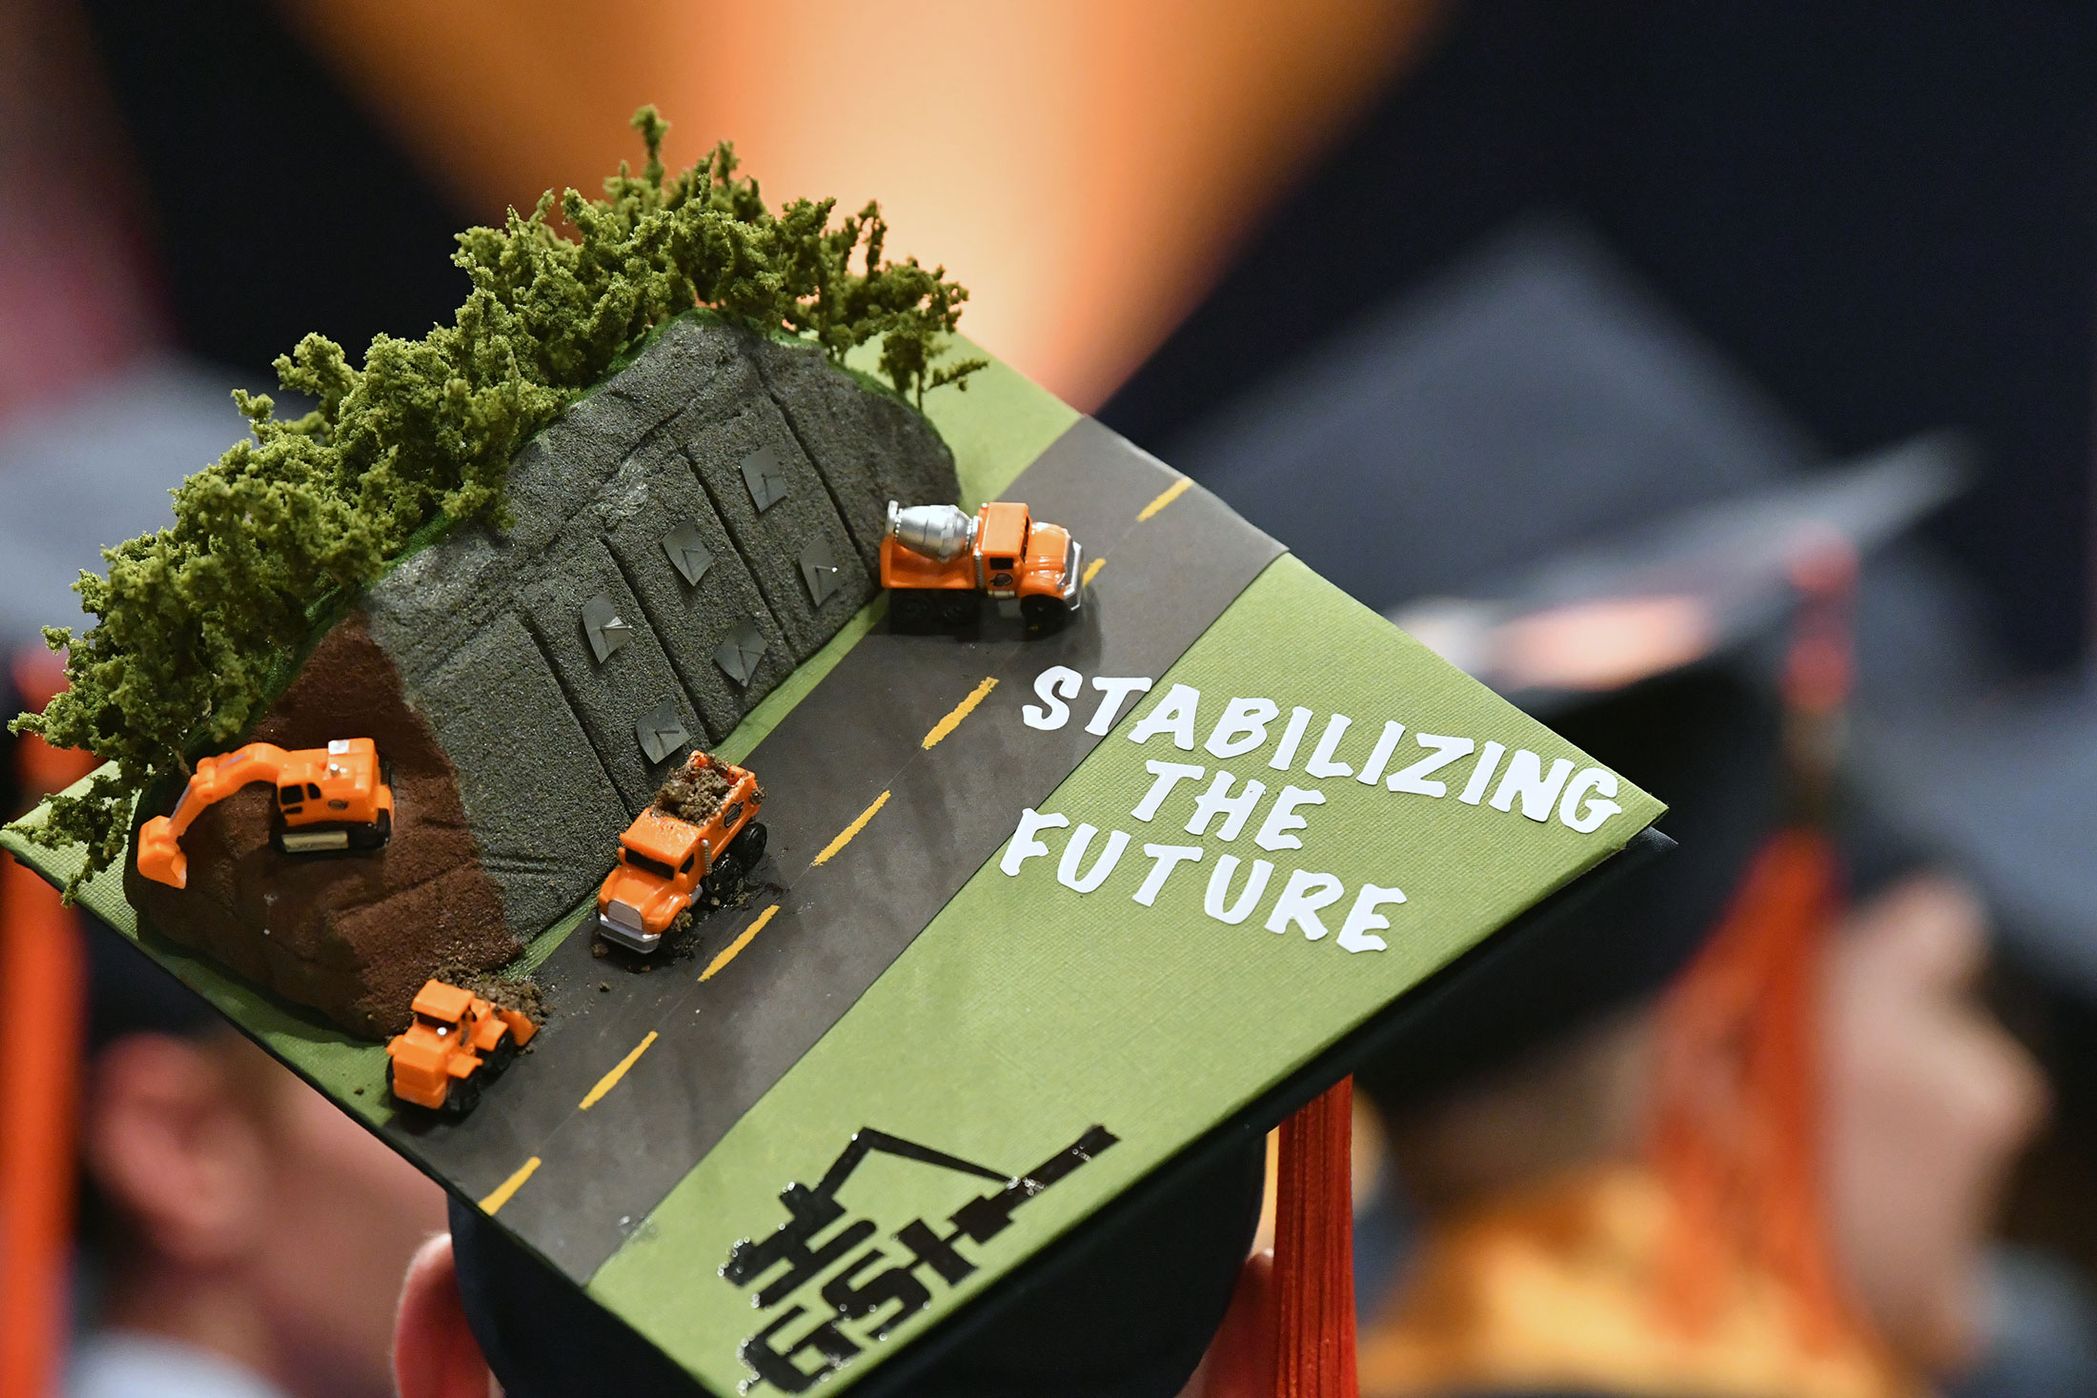 mortarboard "Stabilizing the Future"